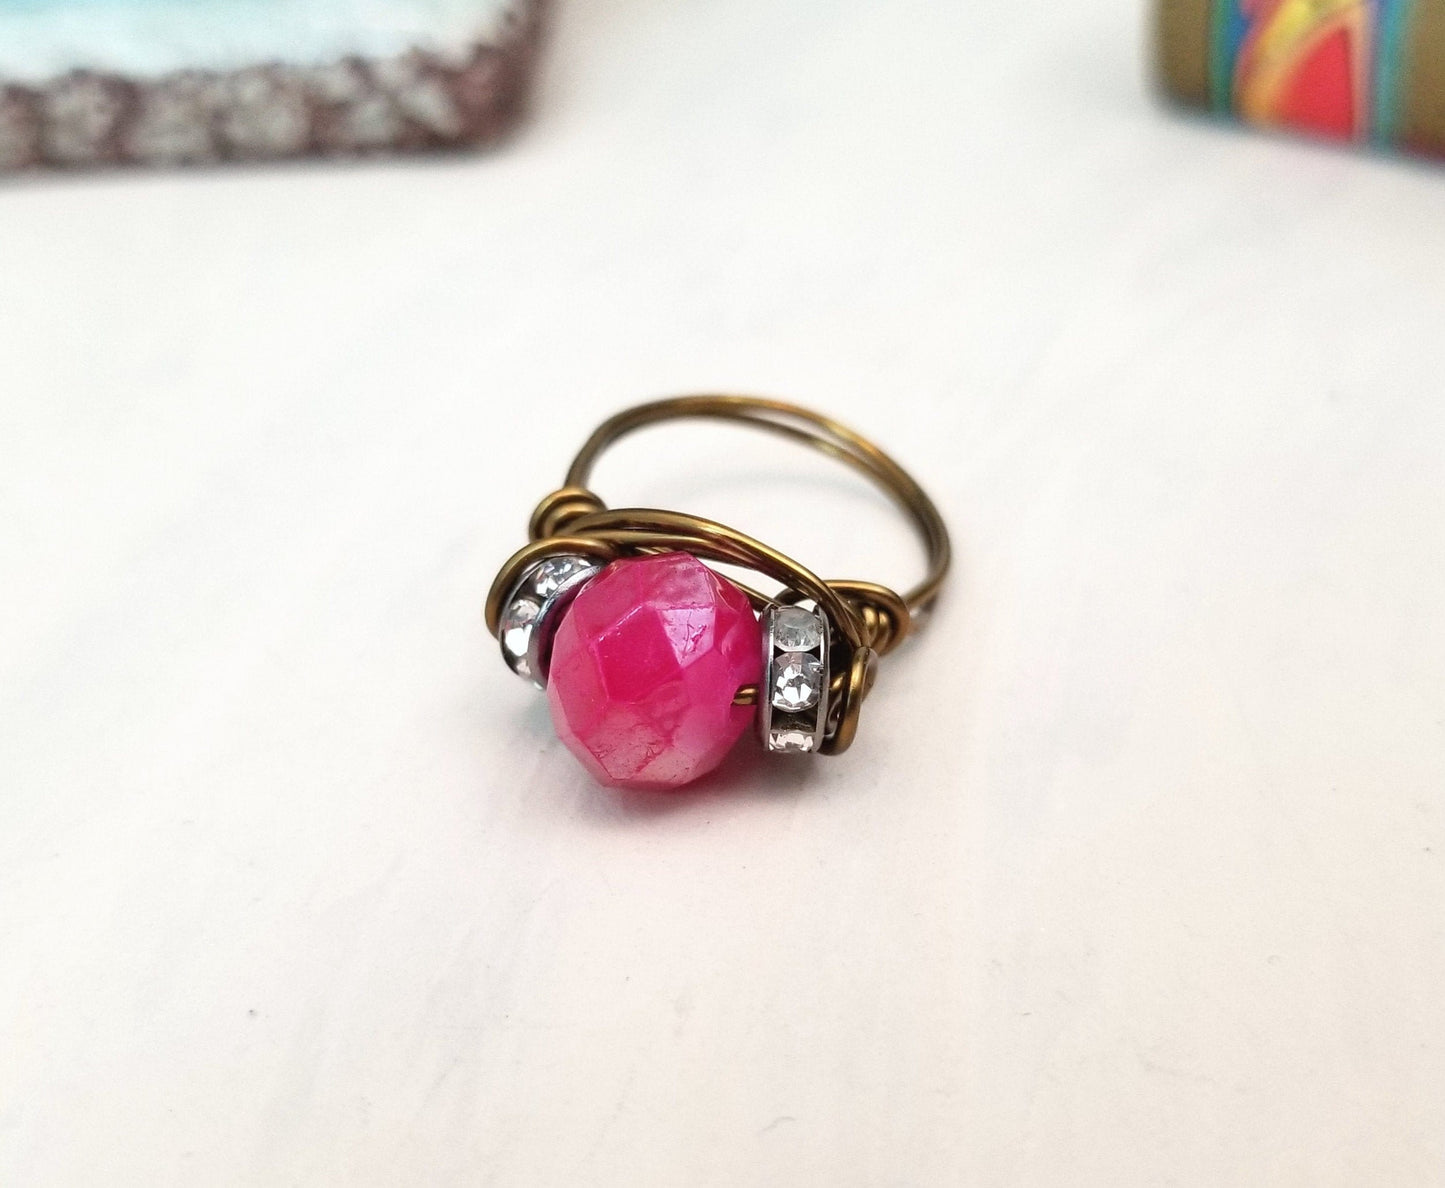 Wire Ring in Red with Rhinestones, Fairy Tale, Renaissance, Medieval, Choice of Colors and Metals